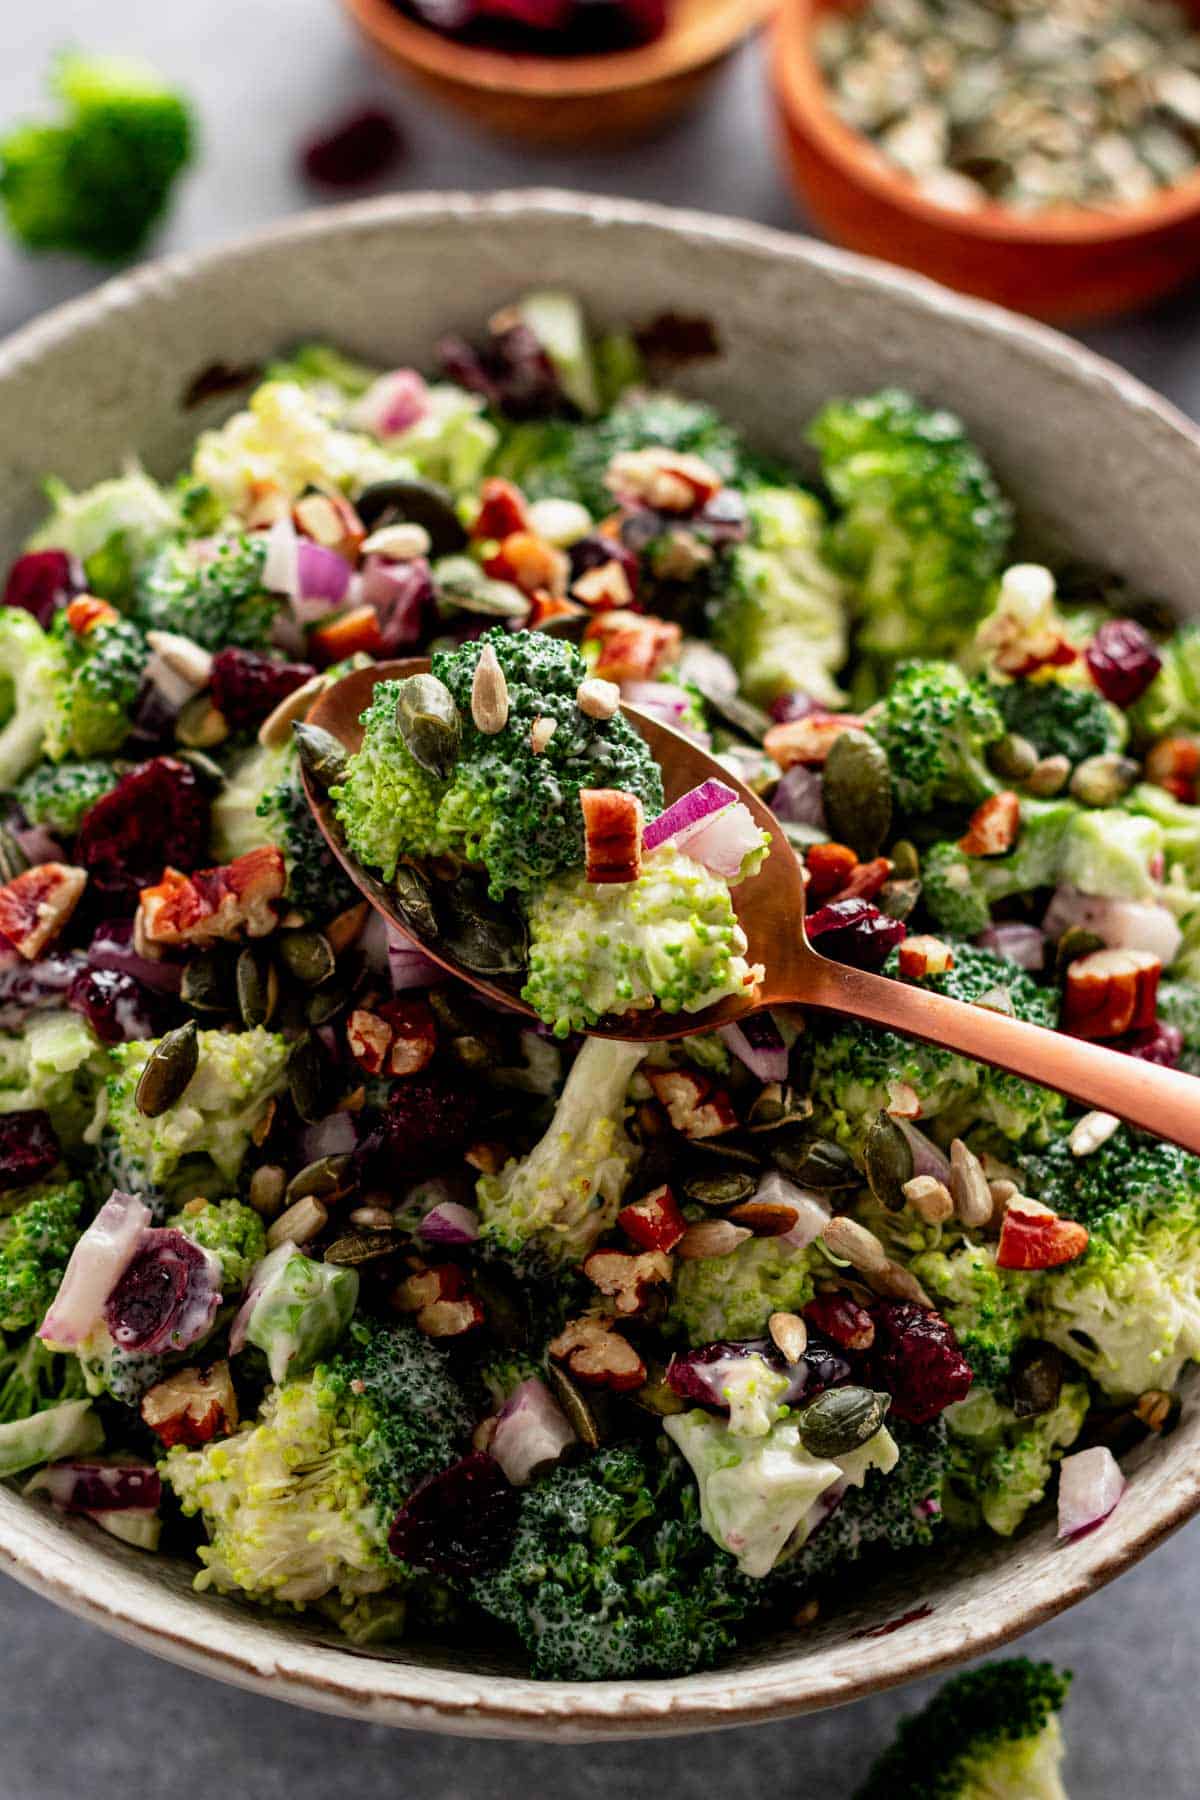 dressed broccoli cranberry salad with sunflower seeds in serving bowl.